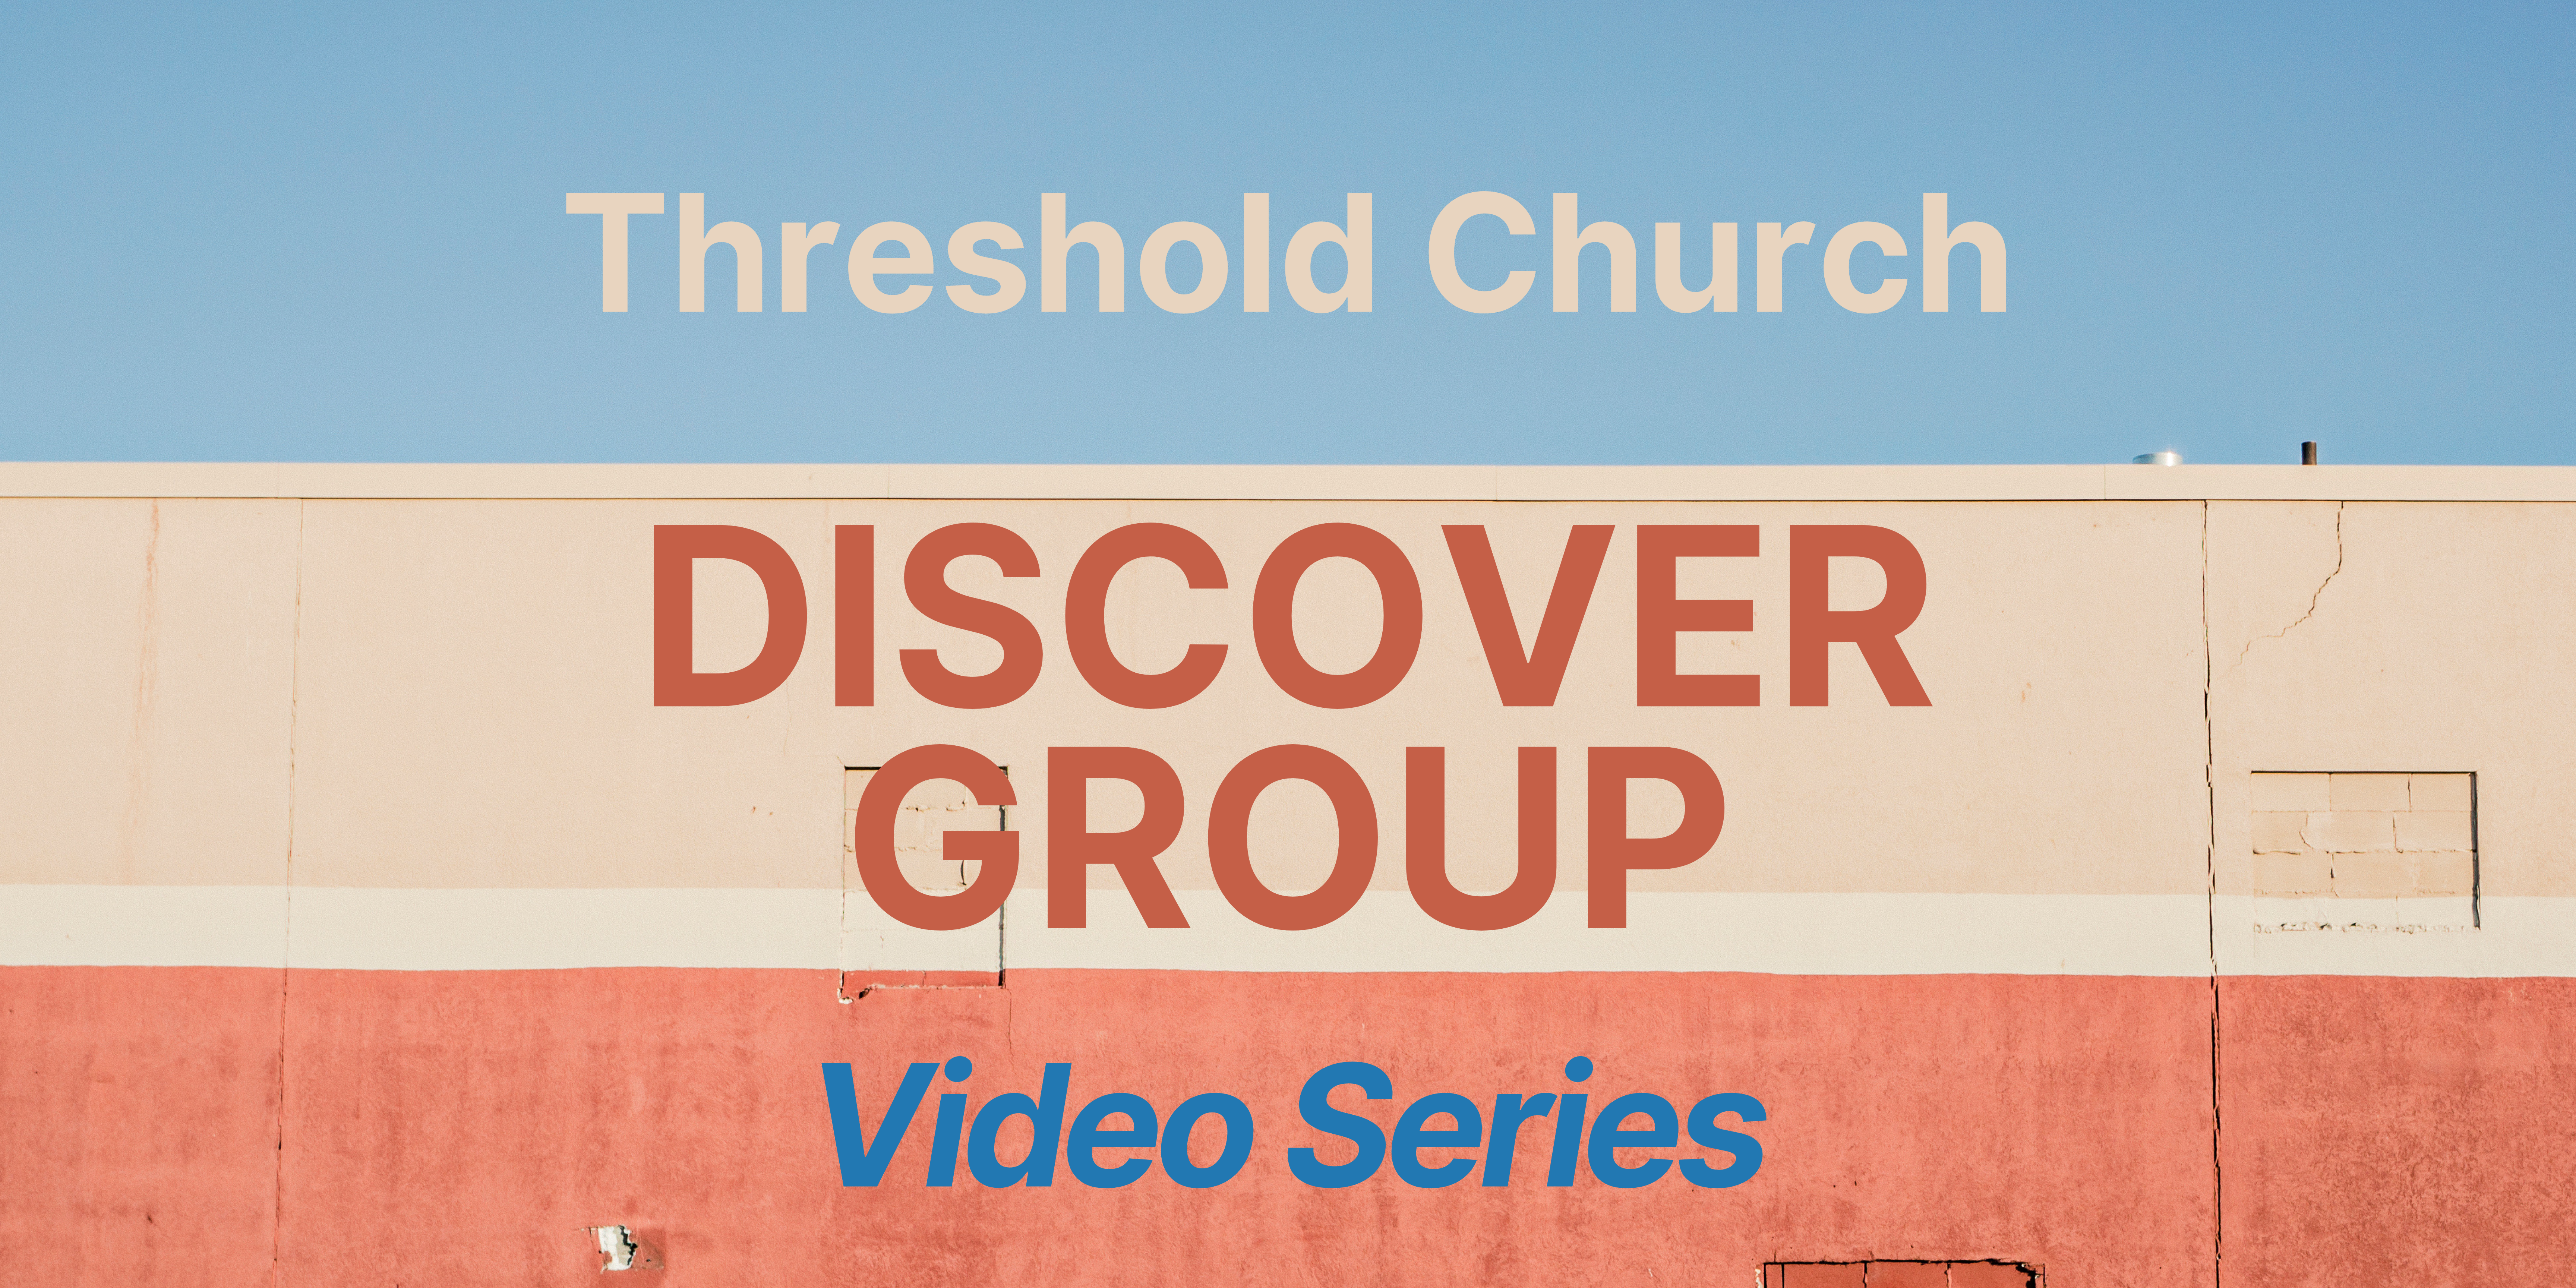 New Discover Group Video Series and Meet & Greet!